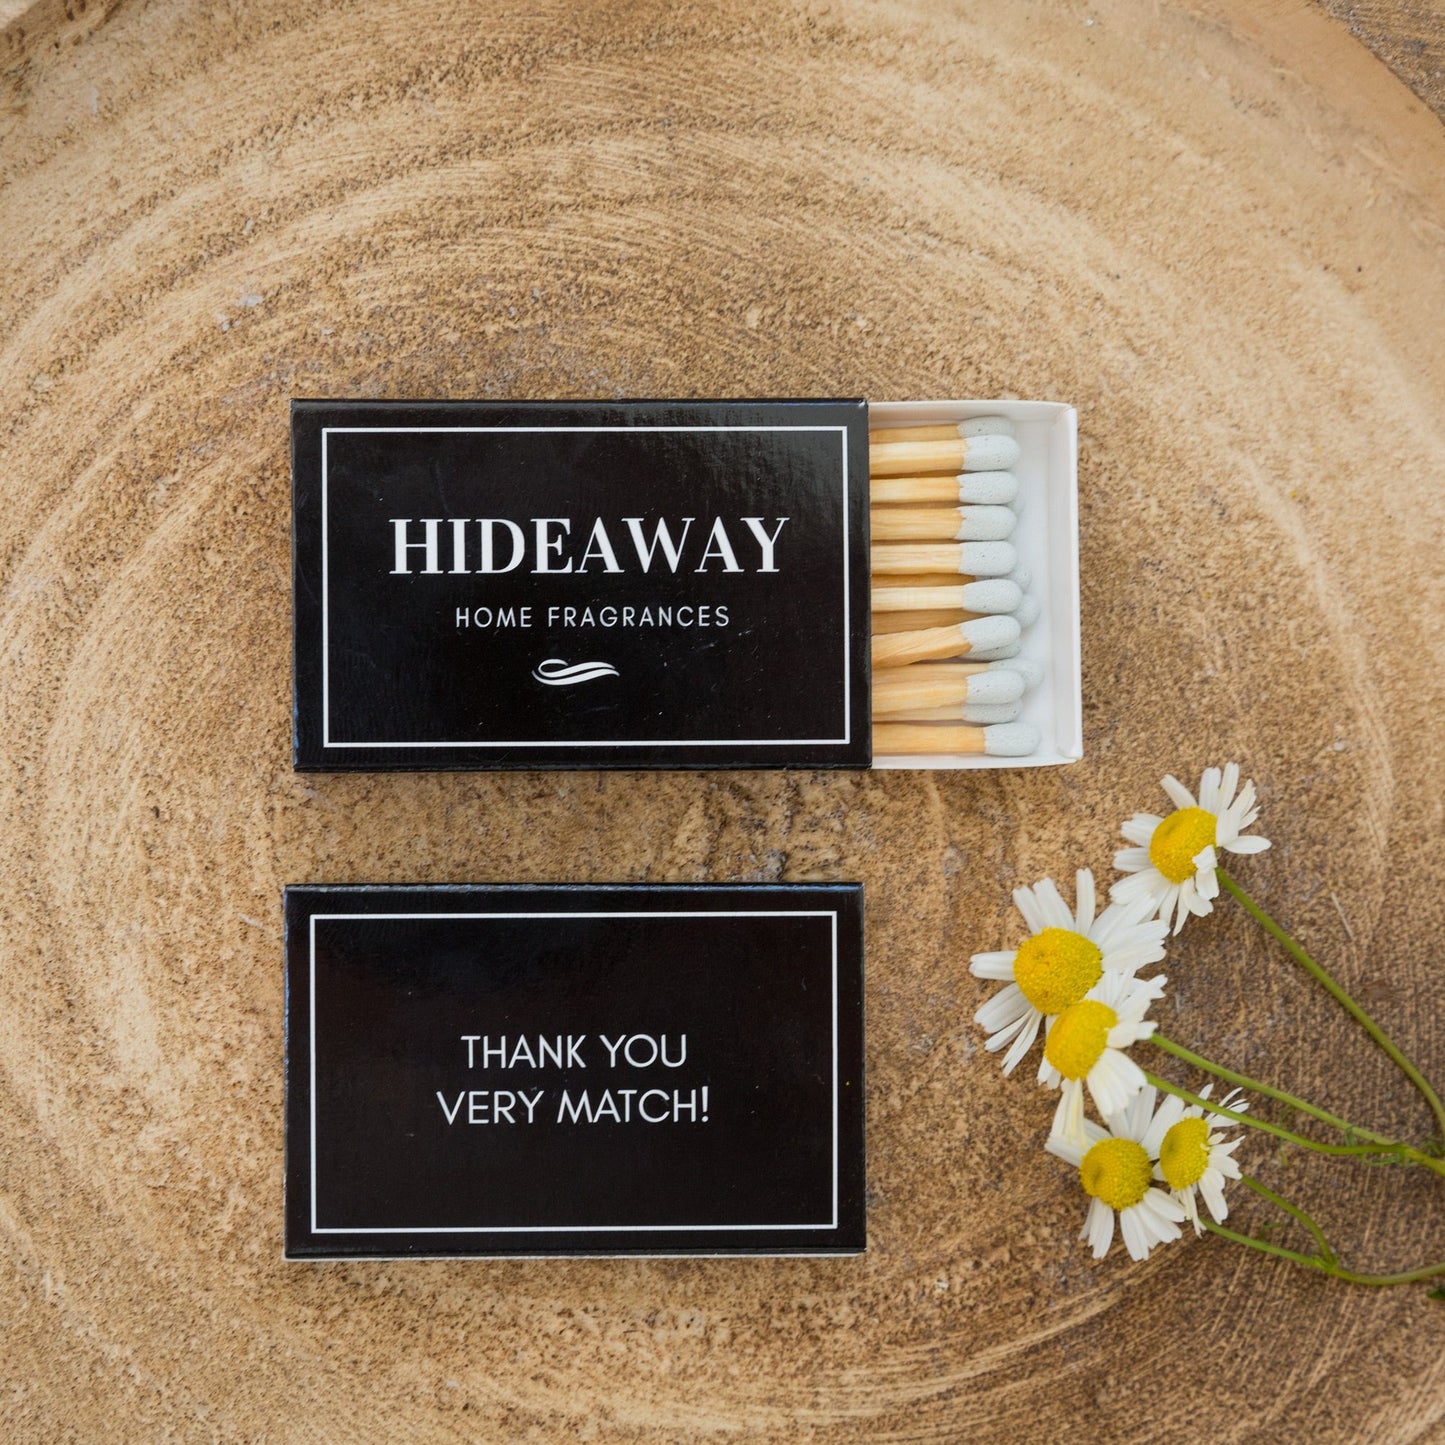 Our matches and match box packaging is biodegradable - Hideaway Home Fragrances